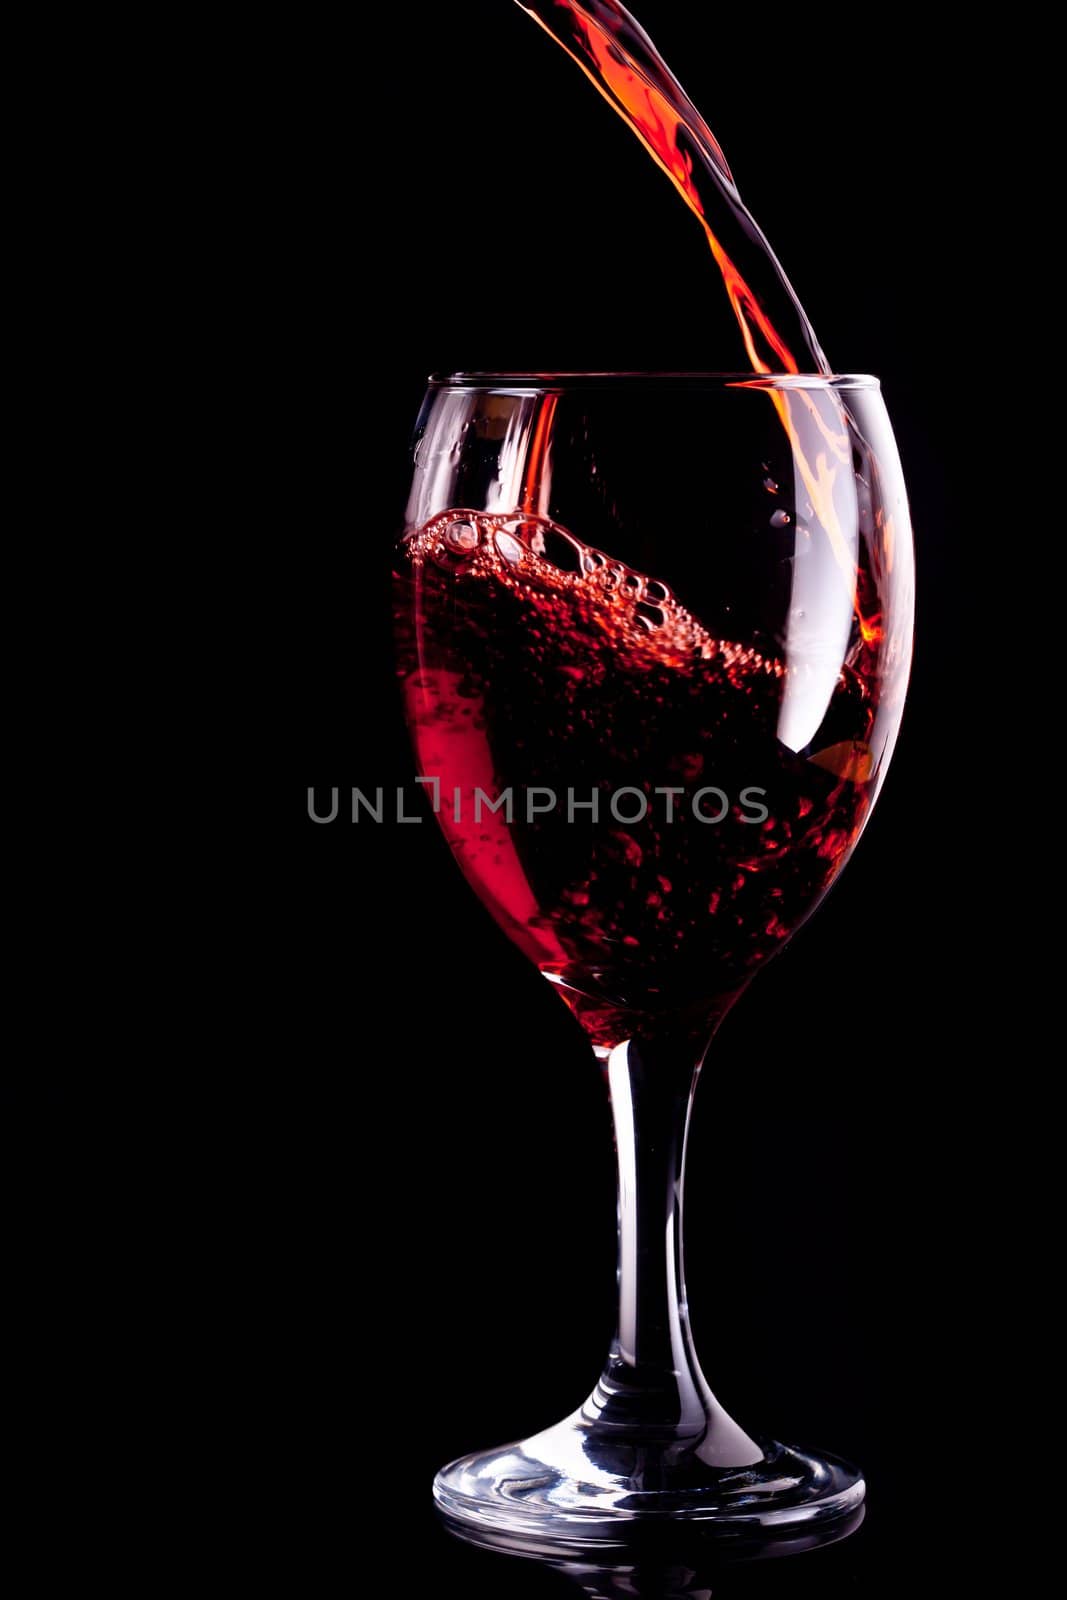 Red wine being poured into glass against black background